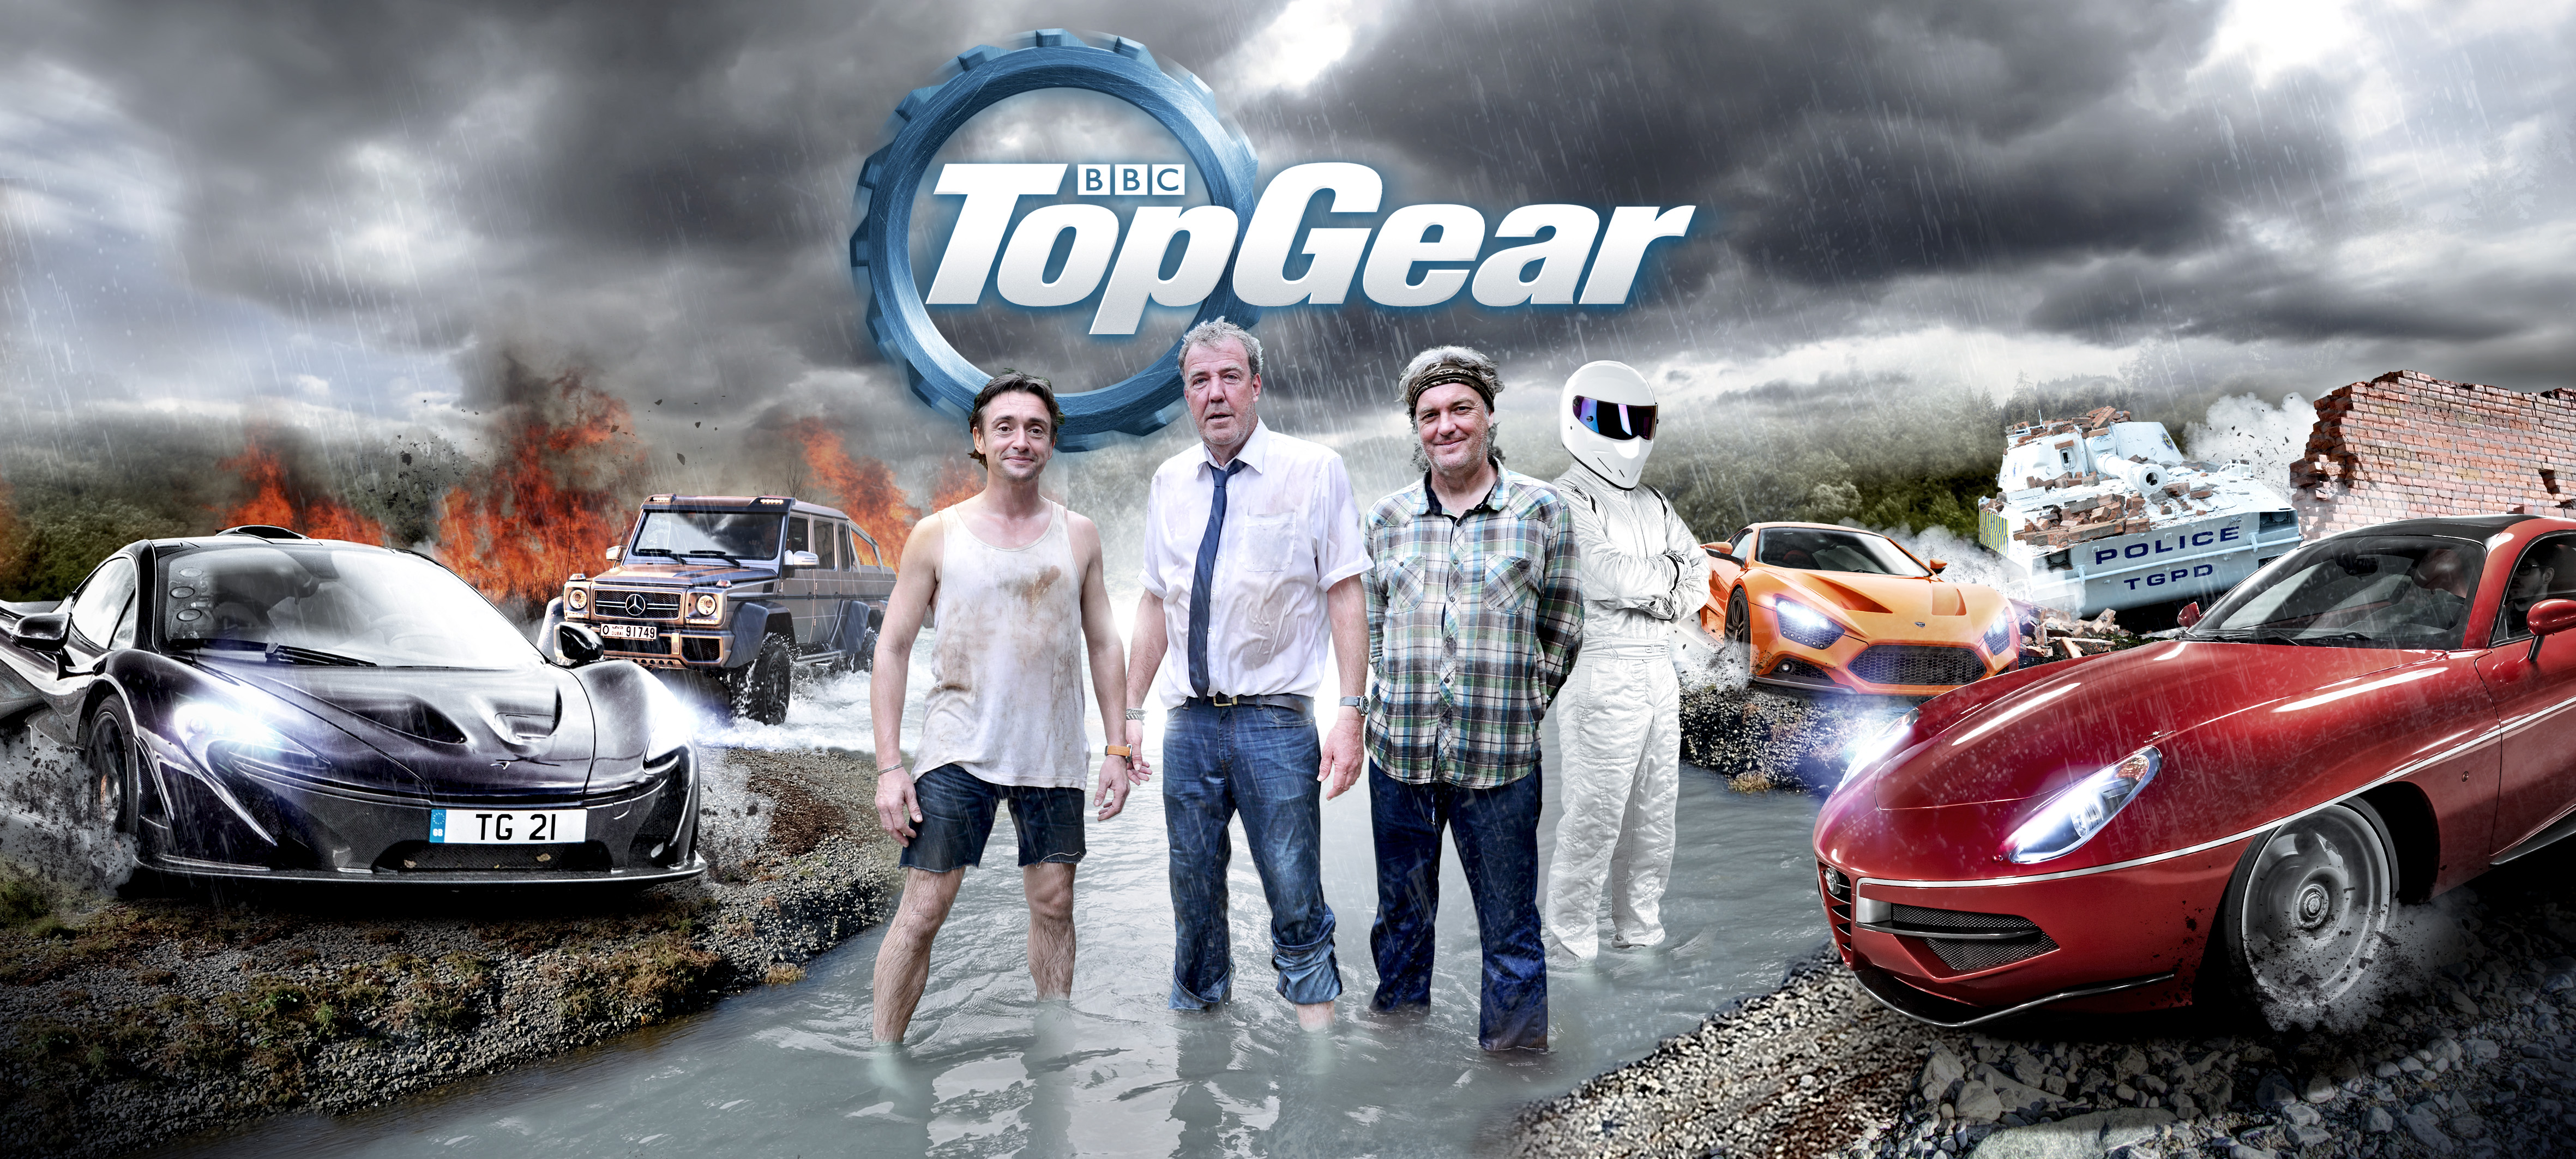 Top Gear' Series 21 to Premiere in on February 10 | Telly Visions